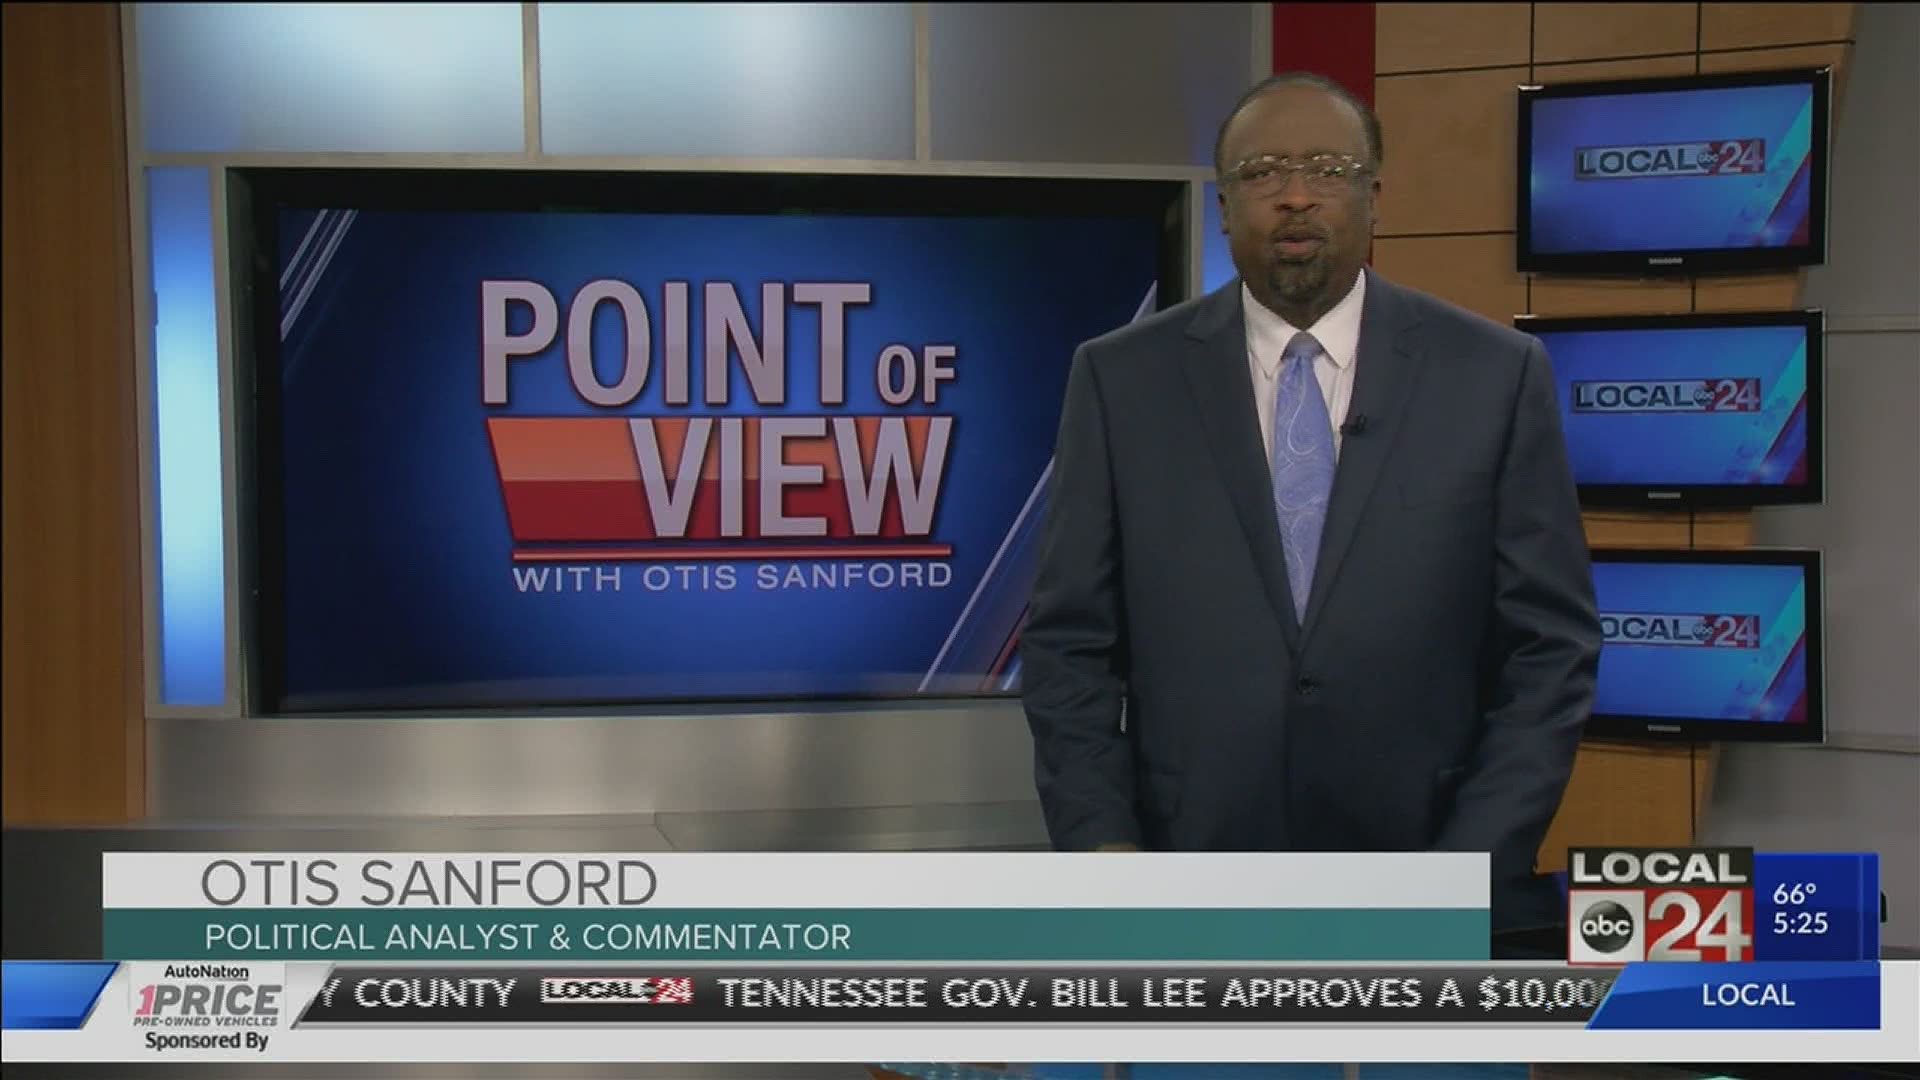 Local 24 News political analyst and commentator Otis Sanford shares his point of view on conflicting messages amid the COVID-19 pandemic.